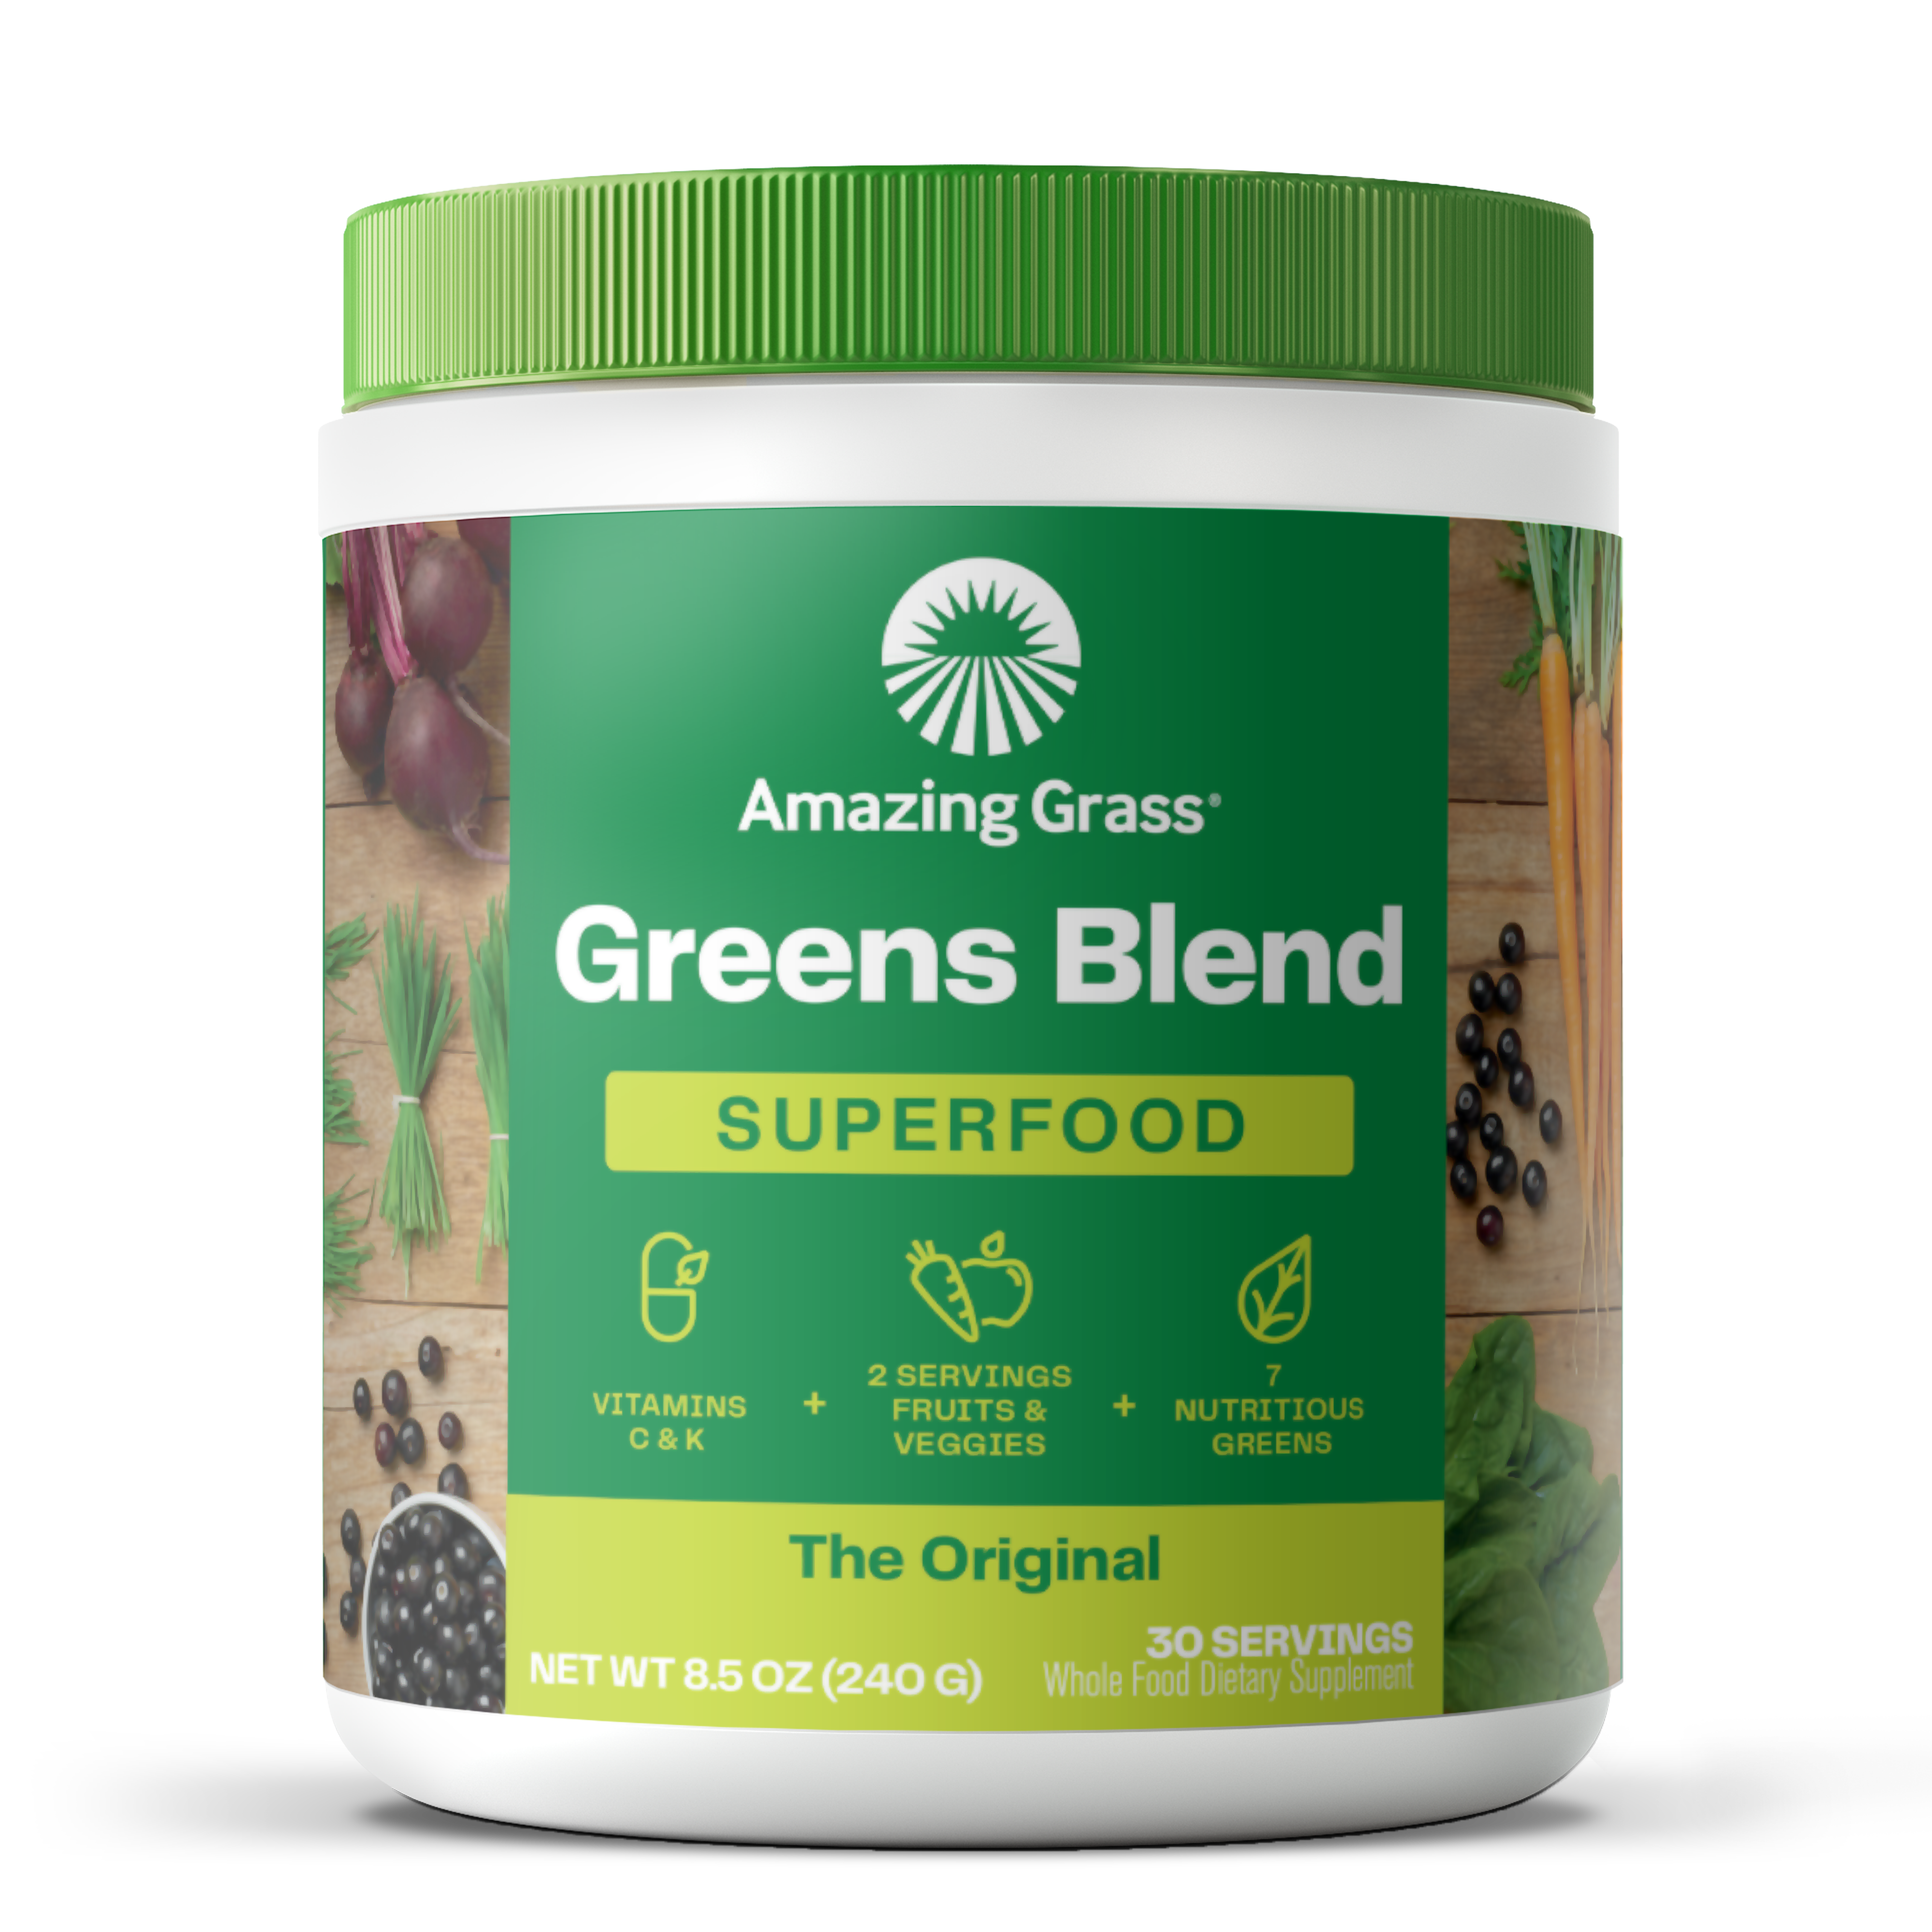 Amazing Grass, Greens Blend Superfood Powder, the Original, 8.5 oz, 30 Servings - image 1 of 10